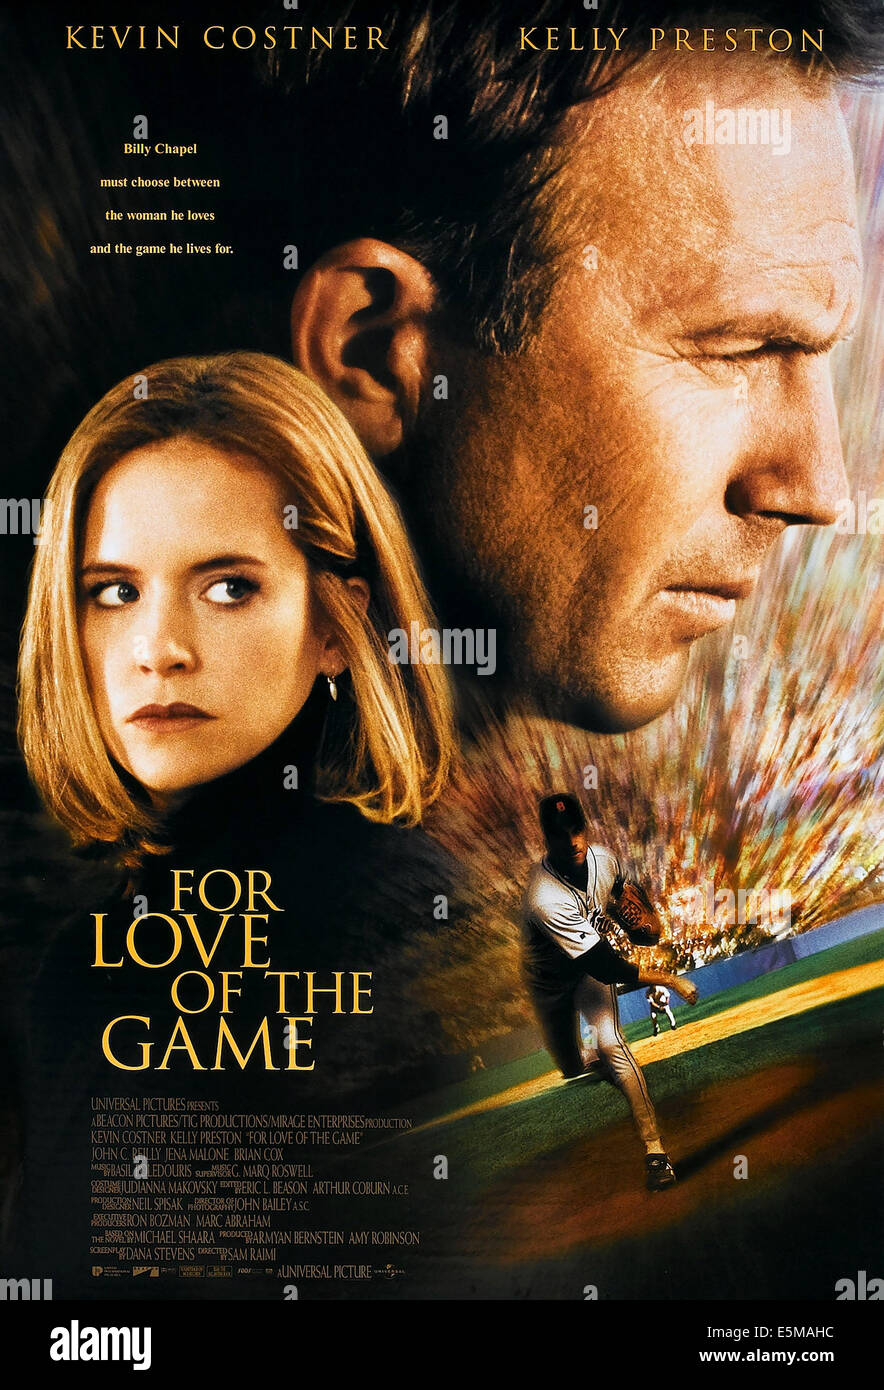 https://c8.alamy.com/comp/E5MAHC/for-love-of-the-game-us-poster-art-from-left-kelly-preston-kevin-costner-E5MAHC.jpg